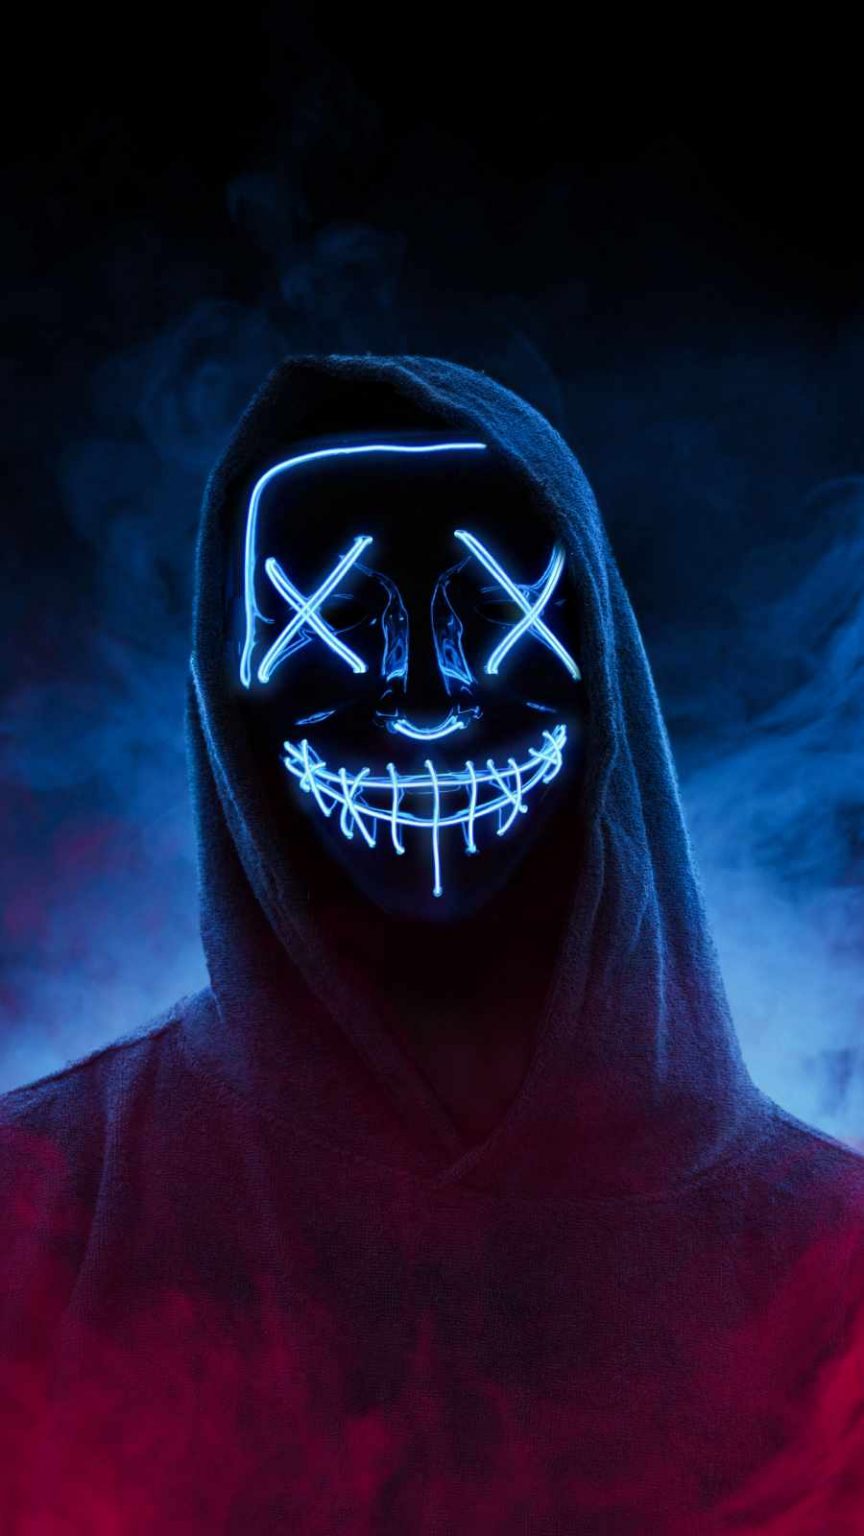 Neon Stitched Mask Hoodie Guy - iPhone Wallpapers